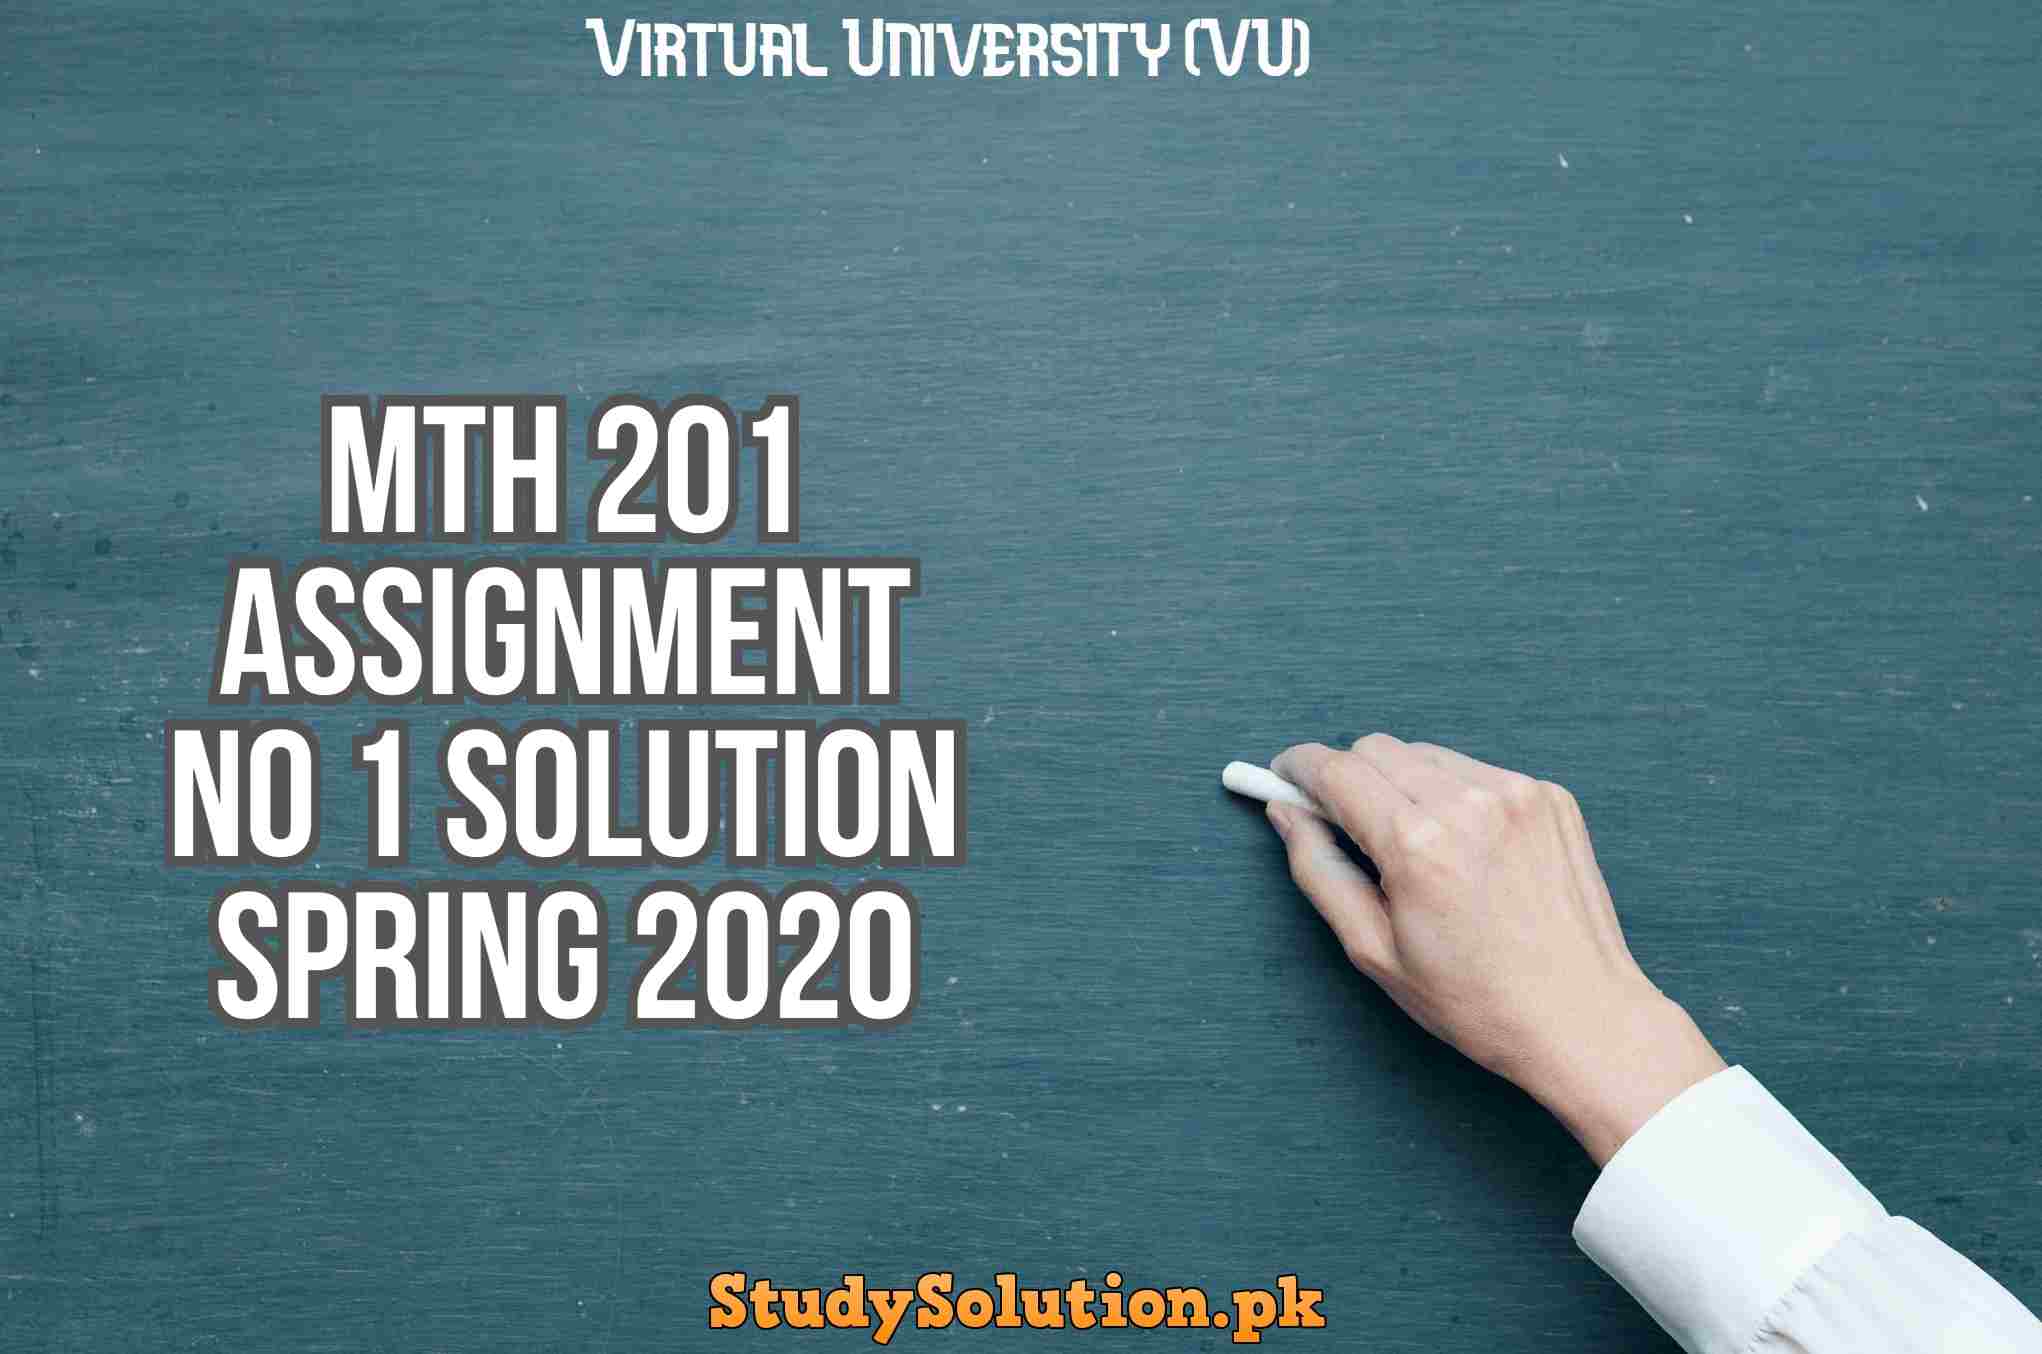 MTH 201 Assignment No 1 Solution Spring 2020